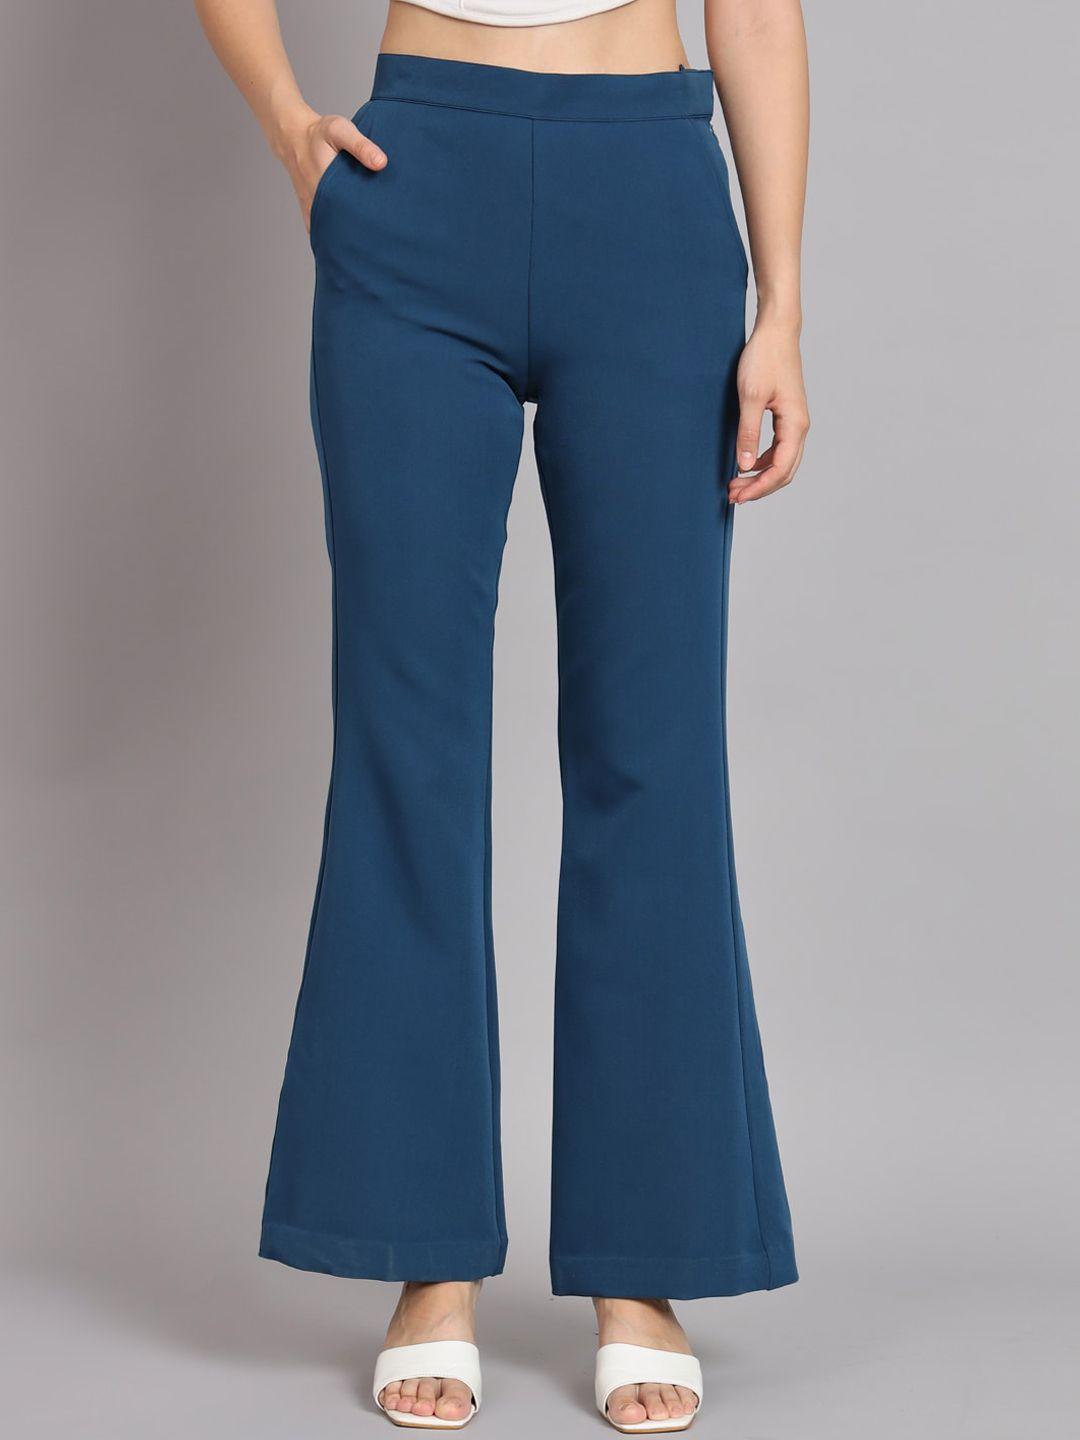 powersutra-women-original-mid-rise-easy-wash-trousers